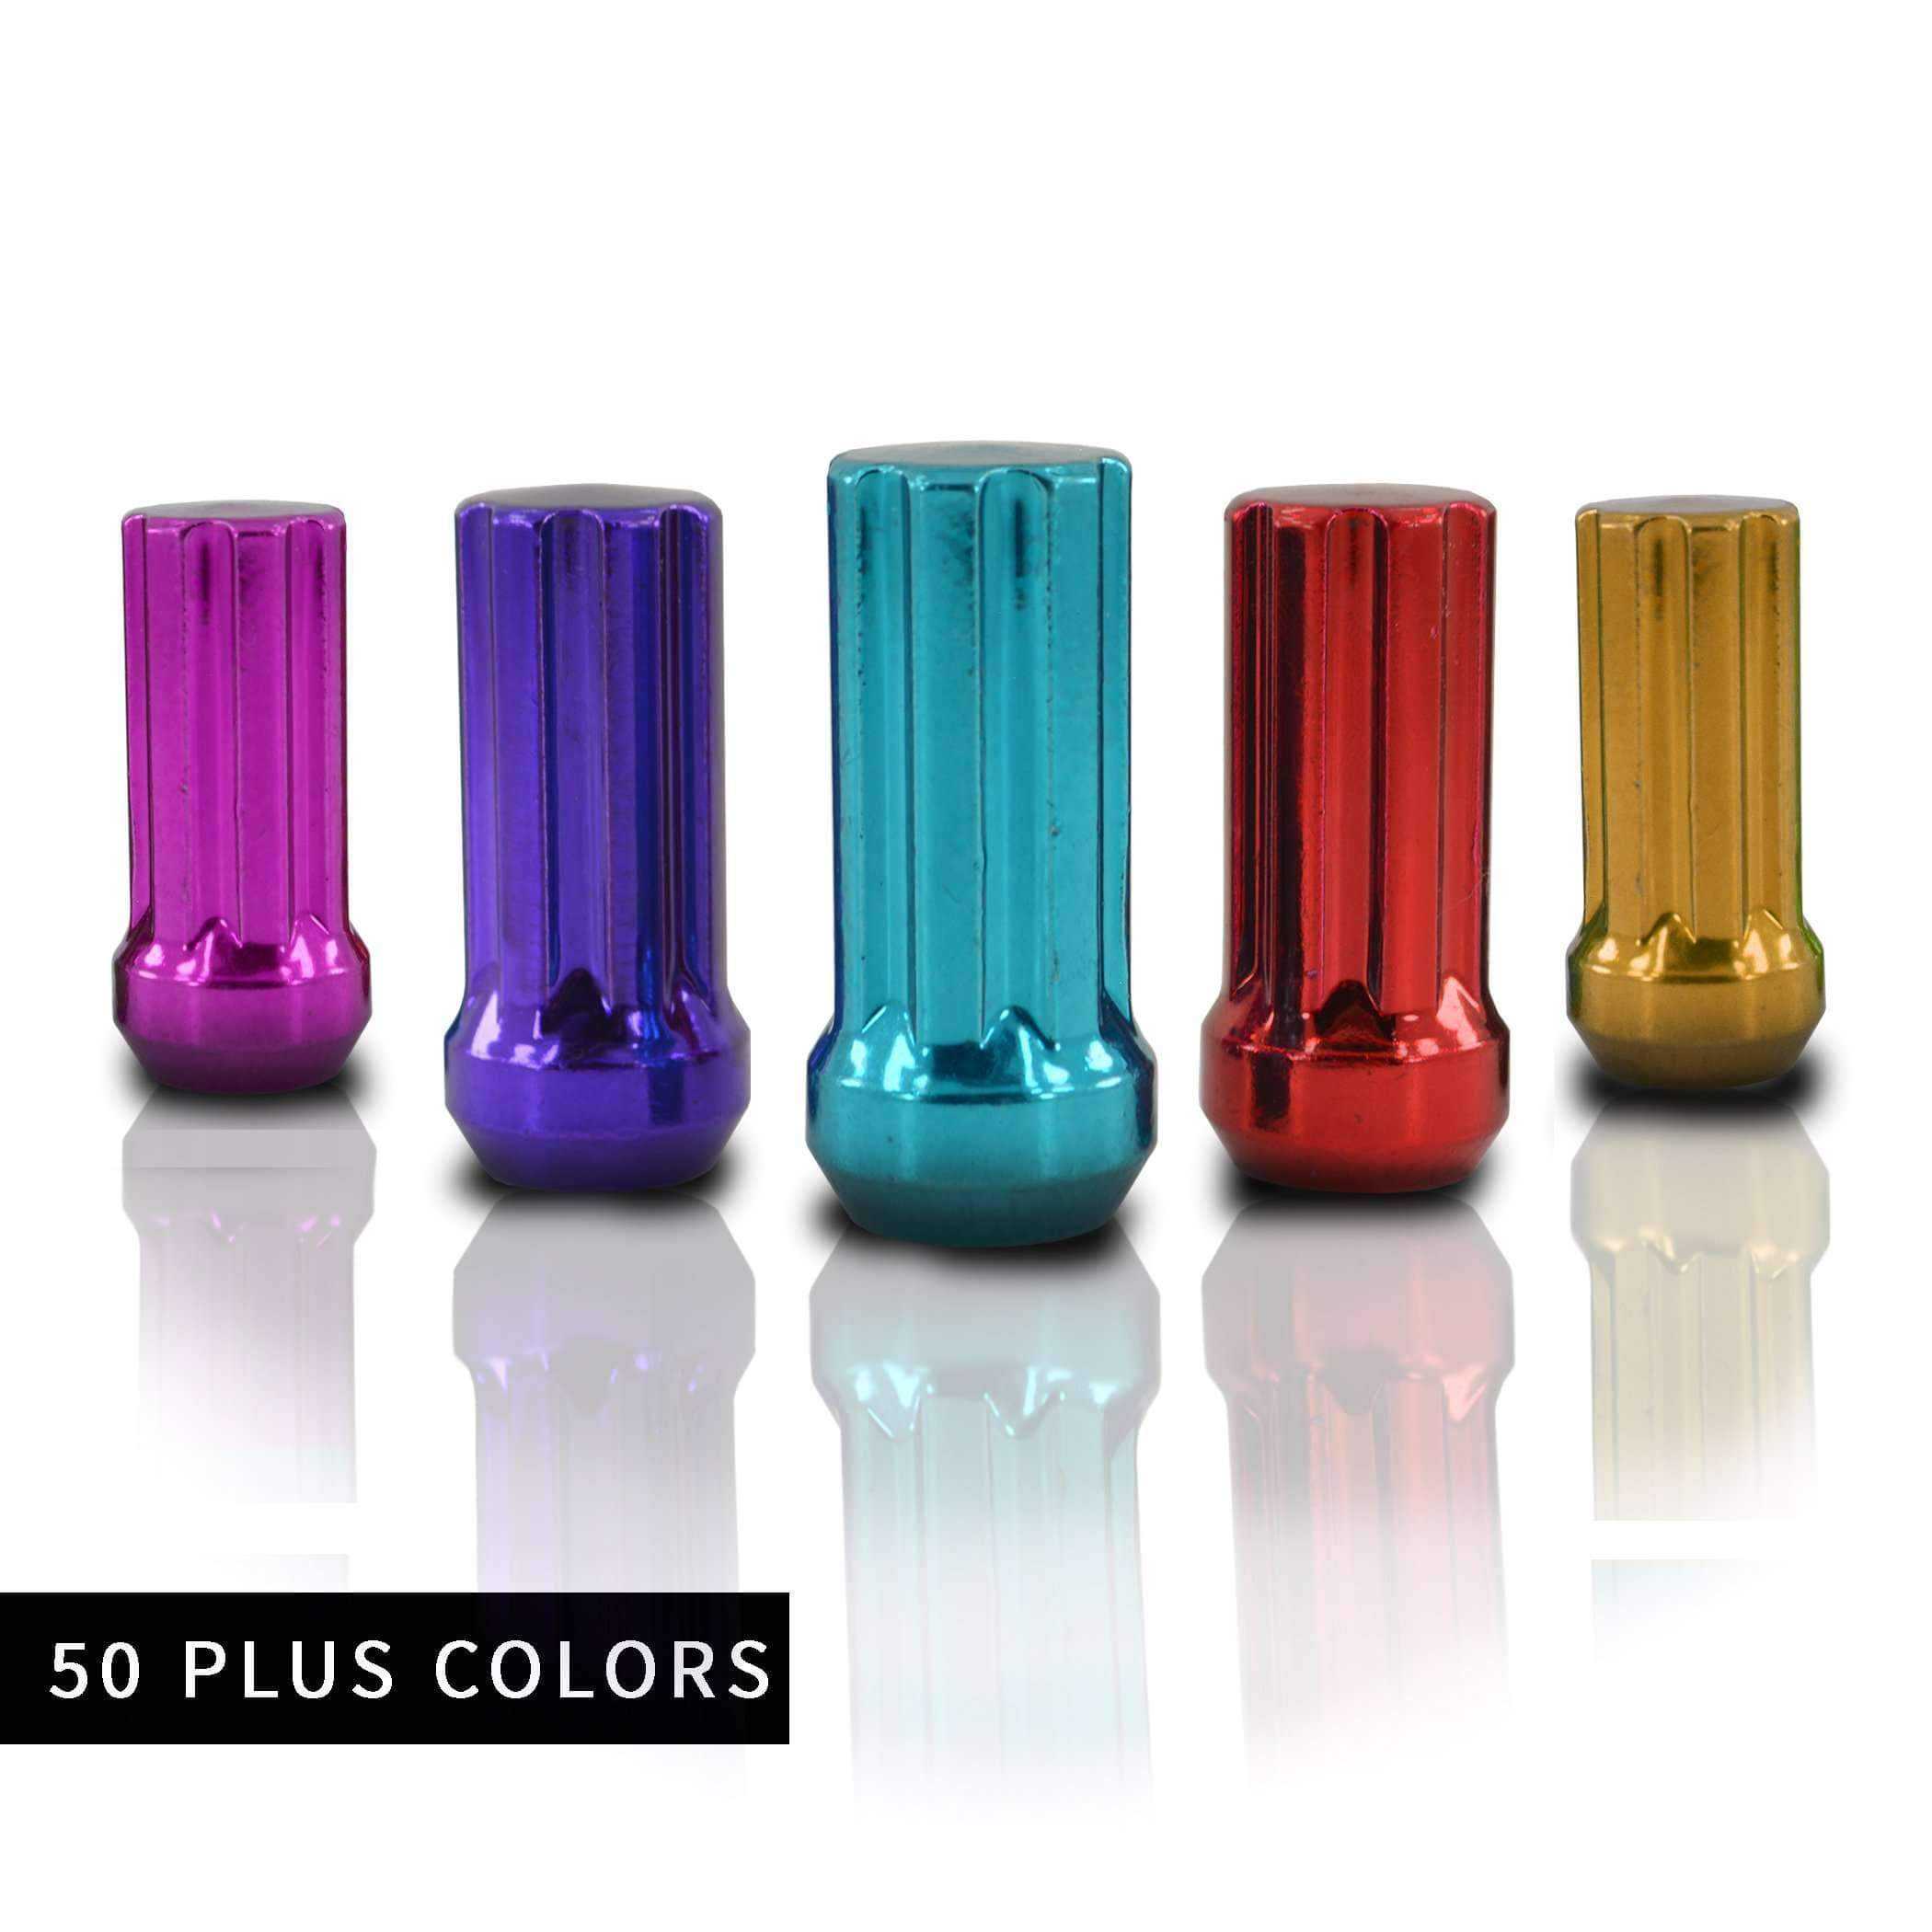 32 pc 9/16-18 main picture 7 Spline Duplex security lug nuts 2" Tall For Aftermarket Wheels powder coated durable coating